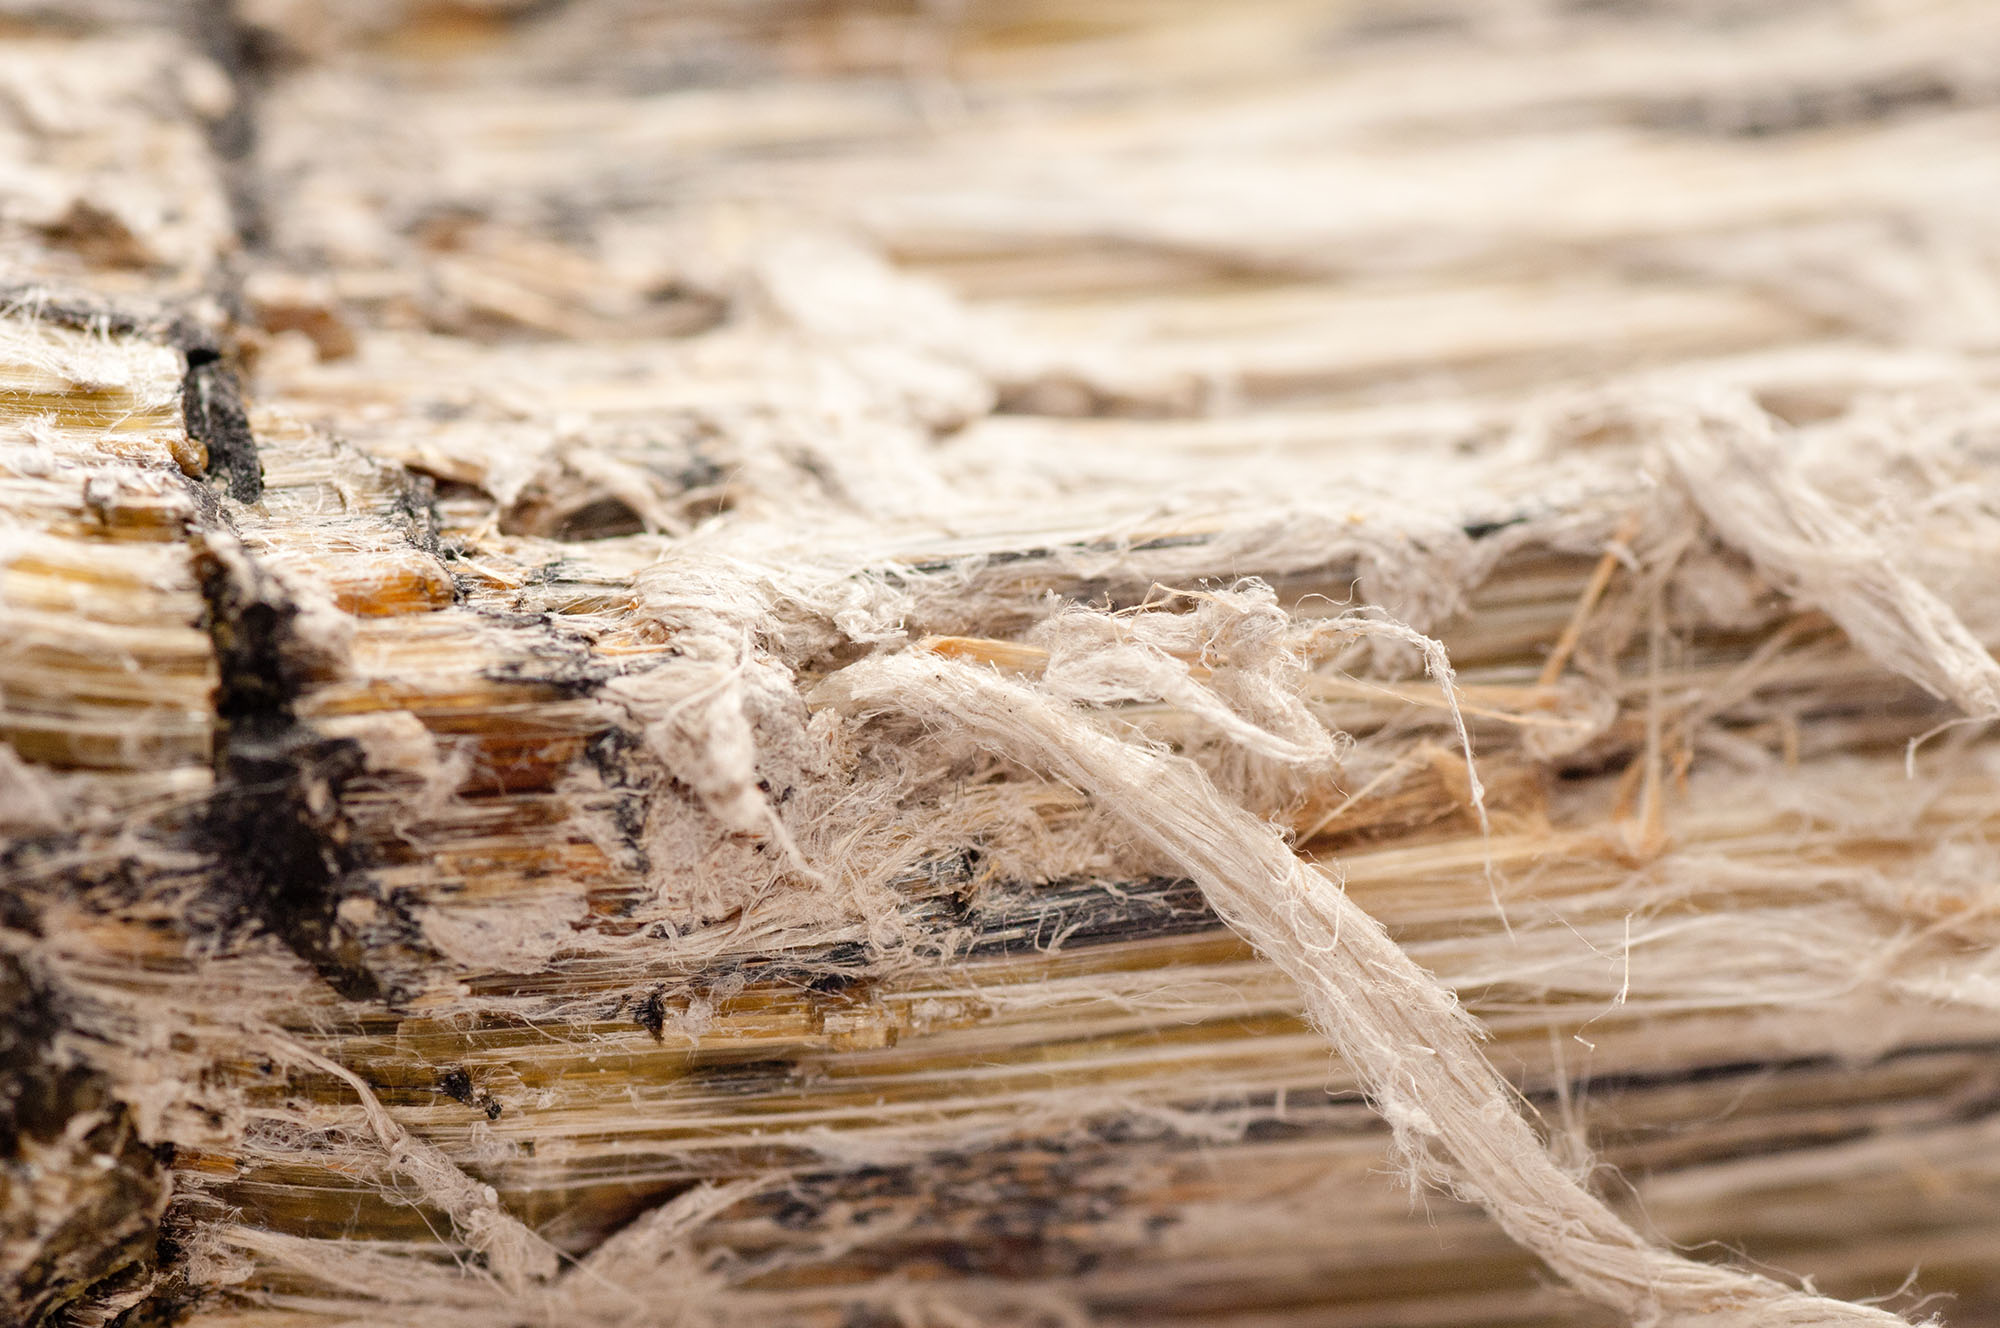 Asbestos chrysotile fibers that cause lung disease, COPD, lung cancer, mesothelioma